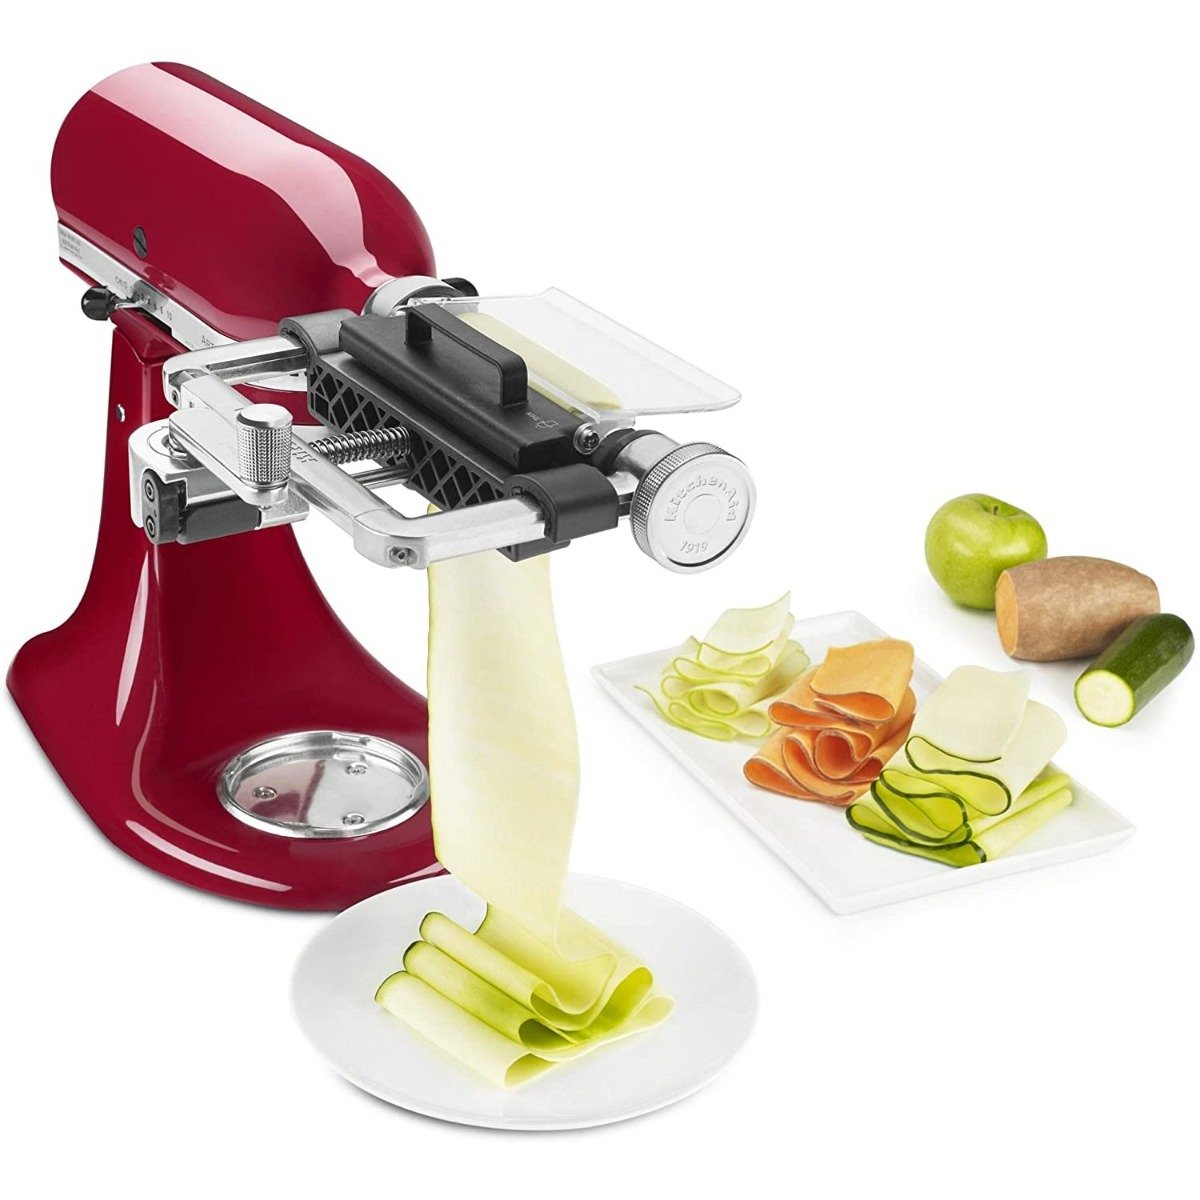 KitchenAid Vegetable Sheet Cutter Attachment with Noodle Blade - image 1 of 3